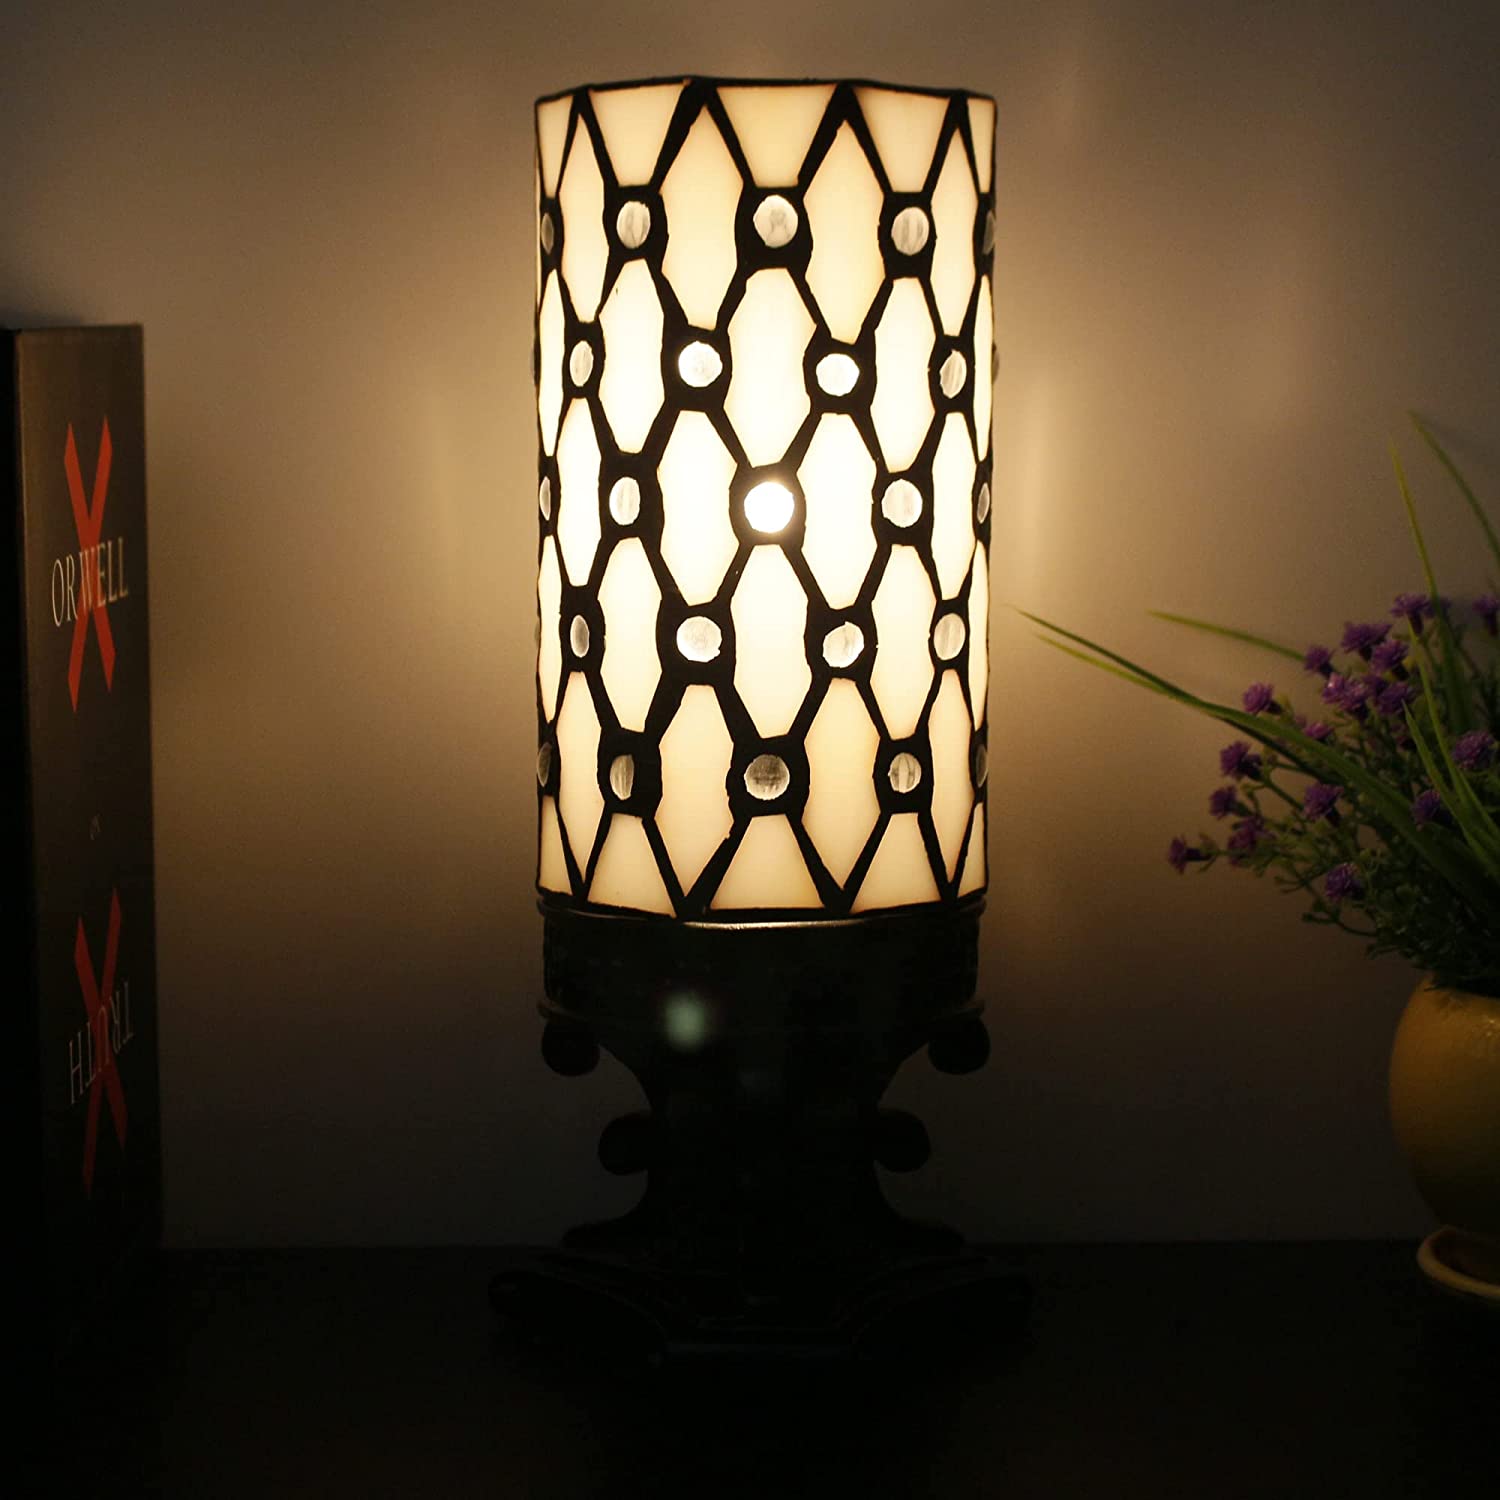 WERFACTORY Small Tiffany Lamp Mini Stained Glass Table Lamp W4H10 InchWhite Crystal Bead Style Desk Night Light